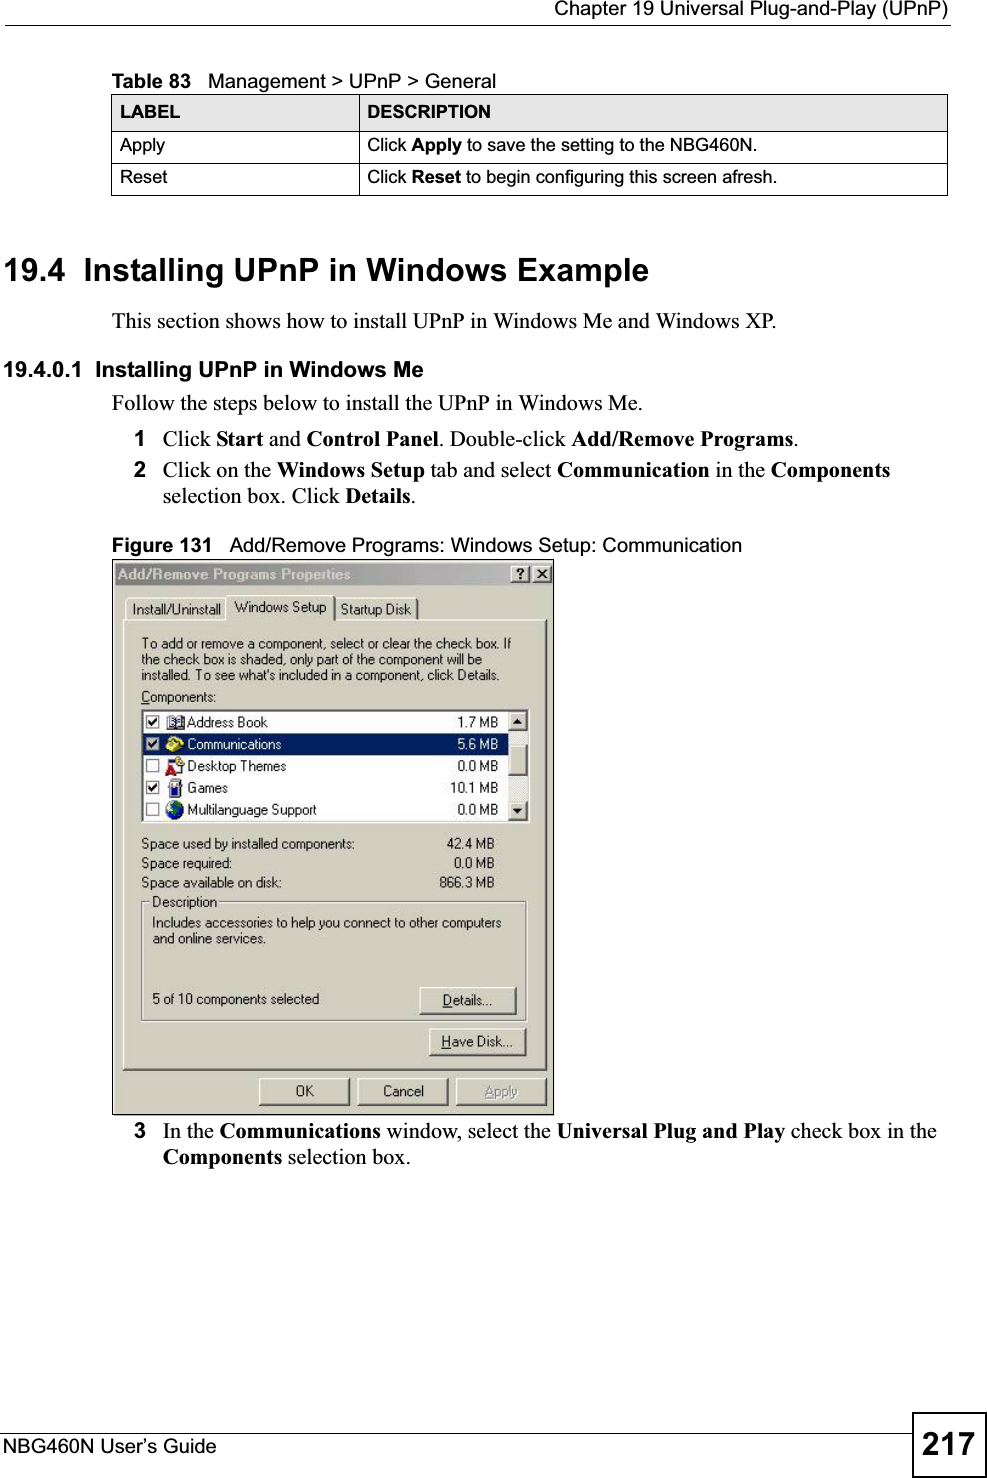  Chapter 19 Universal Plug-and-Play (UPnP)NBG460N User’s Guide 21719.4  Installing UPnP in Windows ExampleThis section shows how to install UPnP in Windows Me and Windows XP. 19.4.0.1  Installing UPnP in Windows MeFollow the steps below to install the UPnP in Windows Me. 1Click Start and Control Panel. Double-click Add/Remove Programs.2Click on the Windows Setup tab and select Communication in the Componentsselection box. Click Details.Figure 131   Add/Remove Programs: Windows Setup: Communication 3In the Communications window, select the Universal Plug and Play check box in the Components selection box. Apply Click Apply to save the setting to the NBG460N.Reset Click Reset to begin configuring this screen afresh.Table 83   Management &gt; UPnP &gt; GeneralLABEL DESCRIPTION